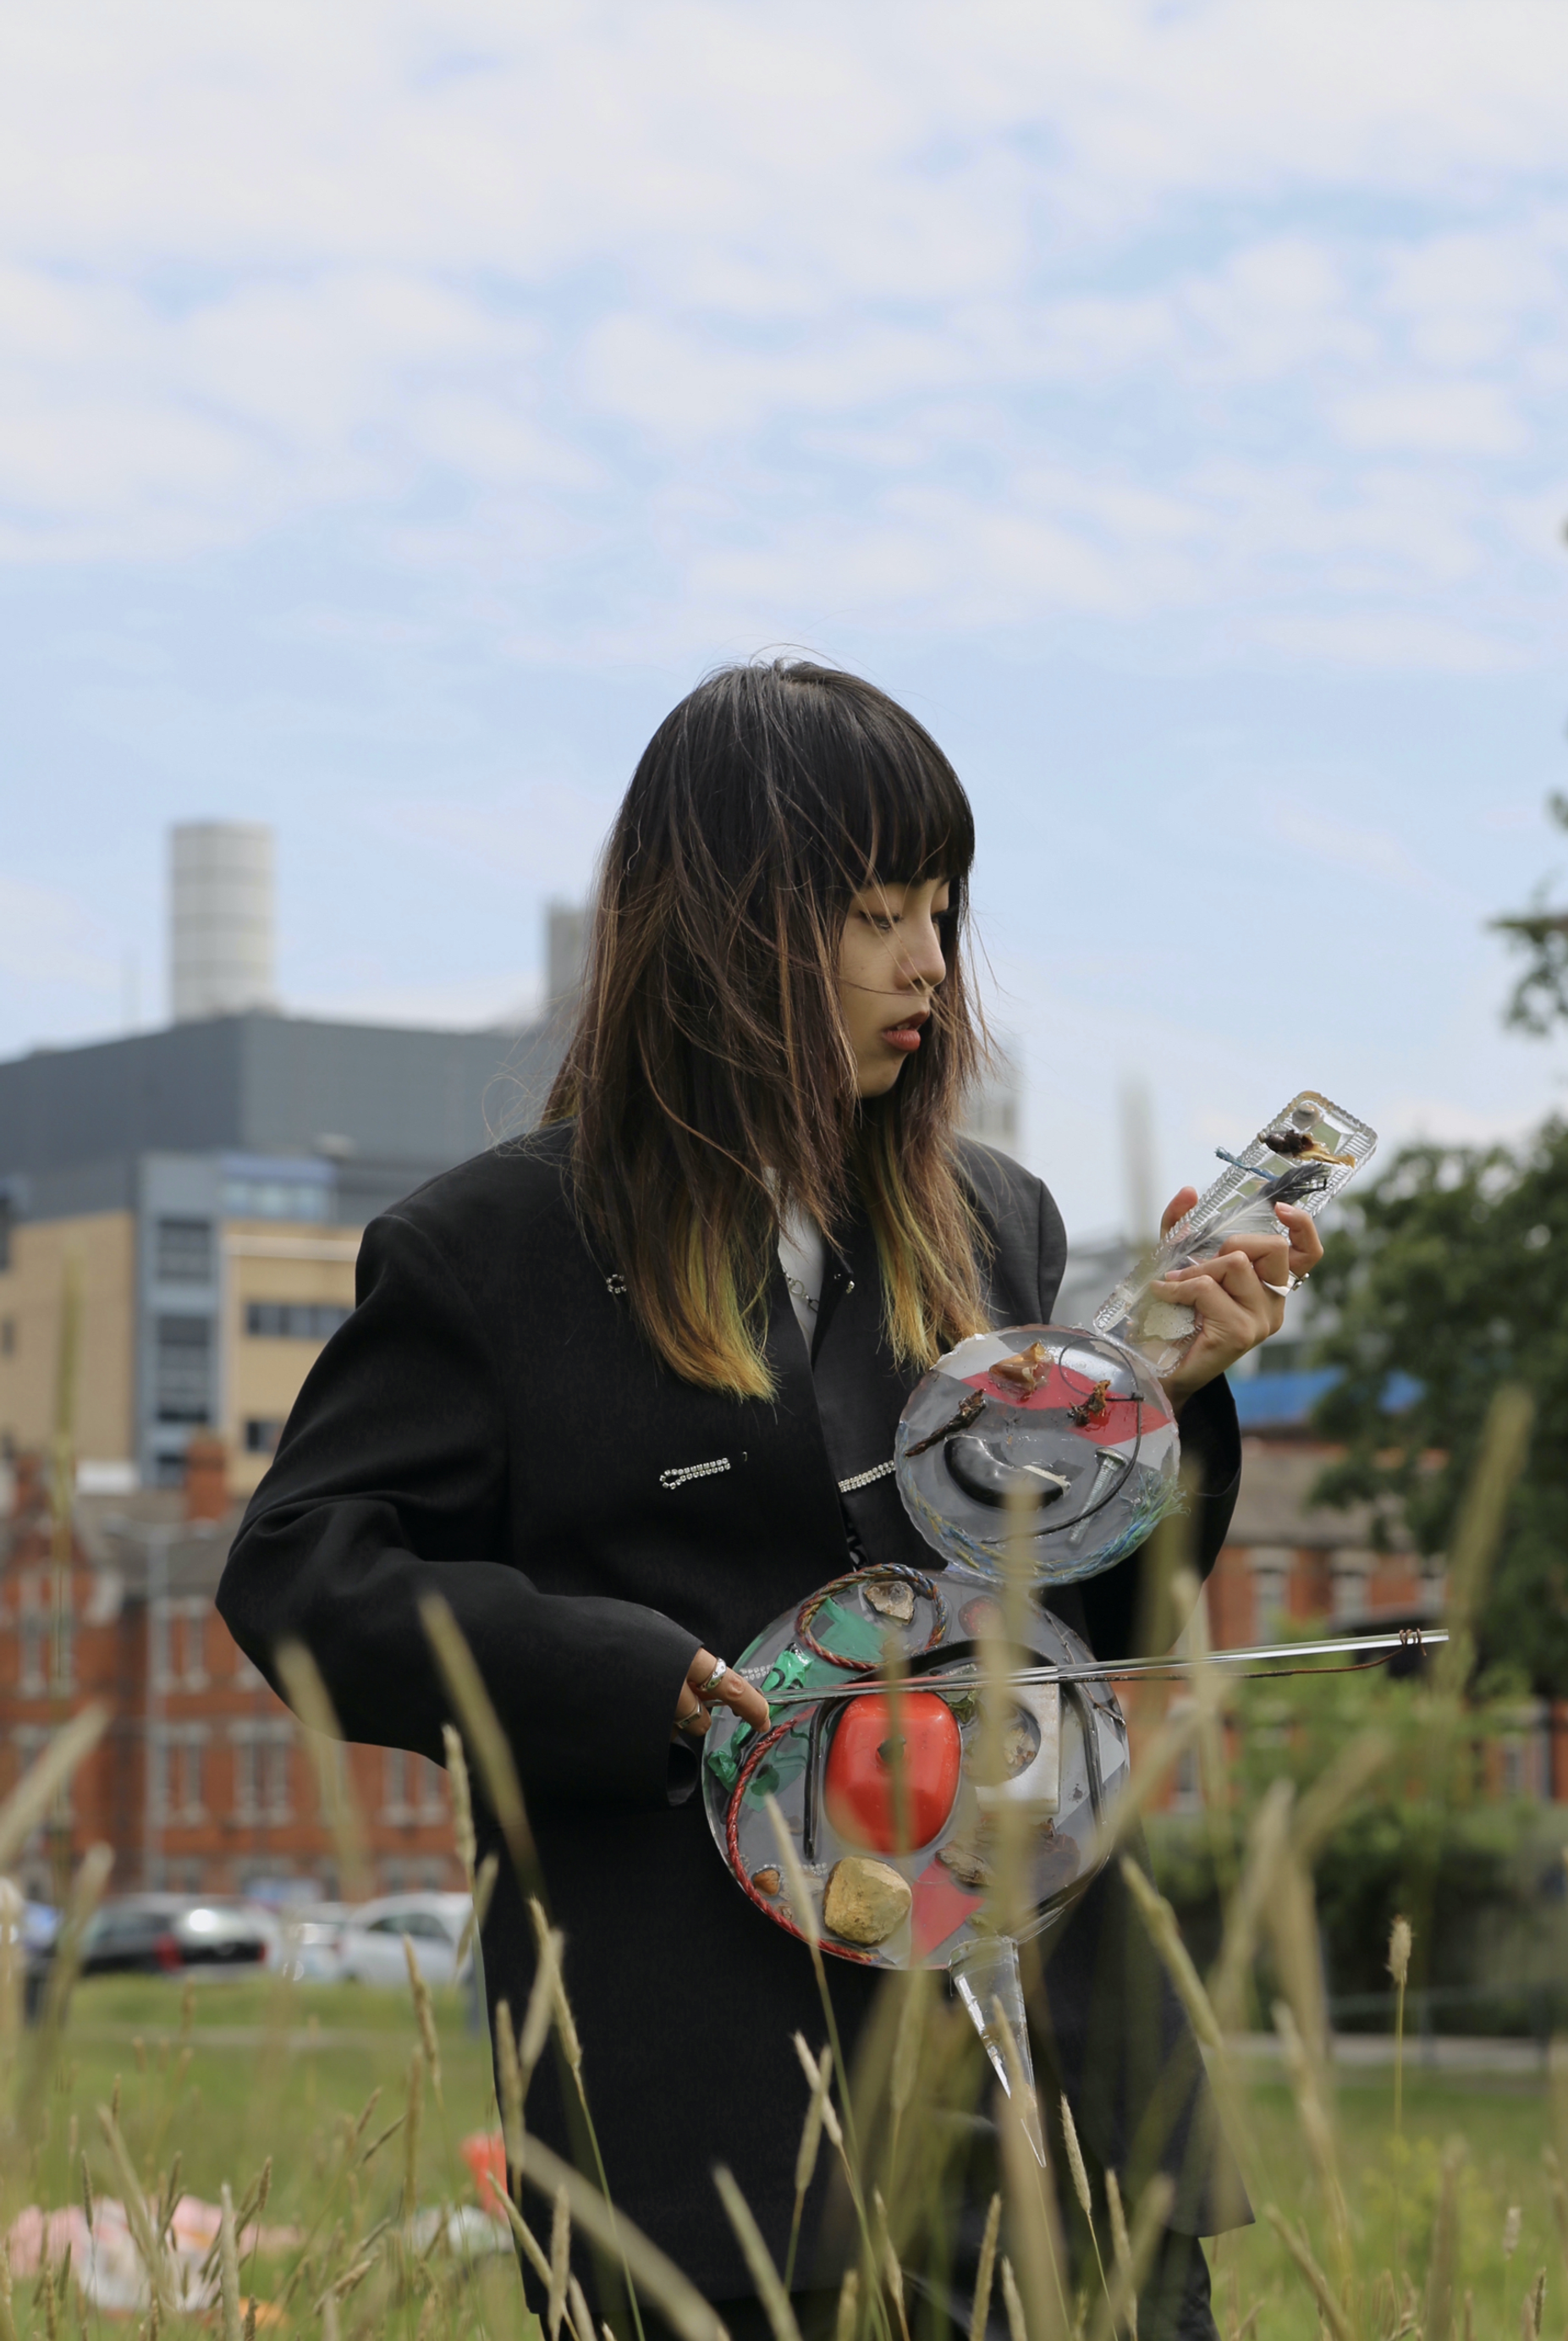 Photograph of a woman from the knees up, standing in a park, with buildings in the distance behind her, playing a musical instrument resembling a large violin made from various materials.